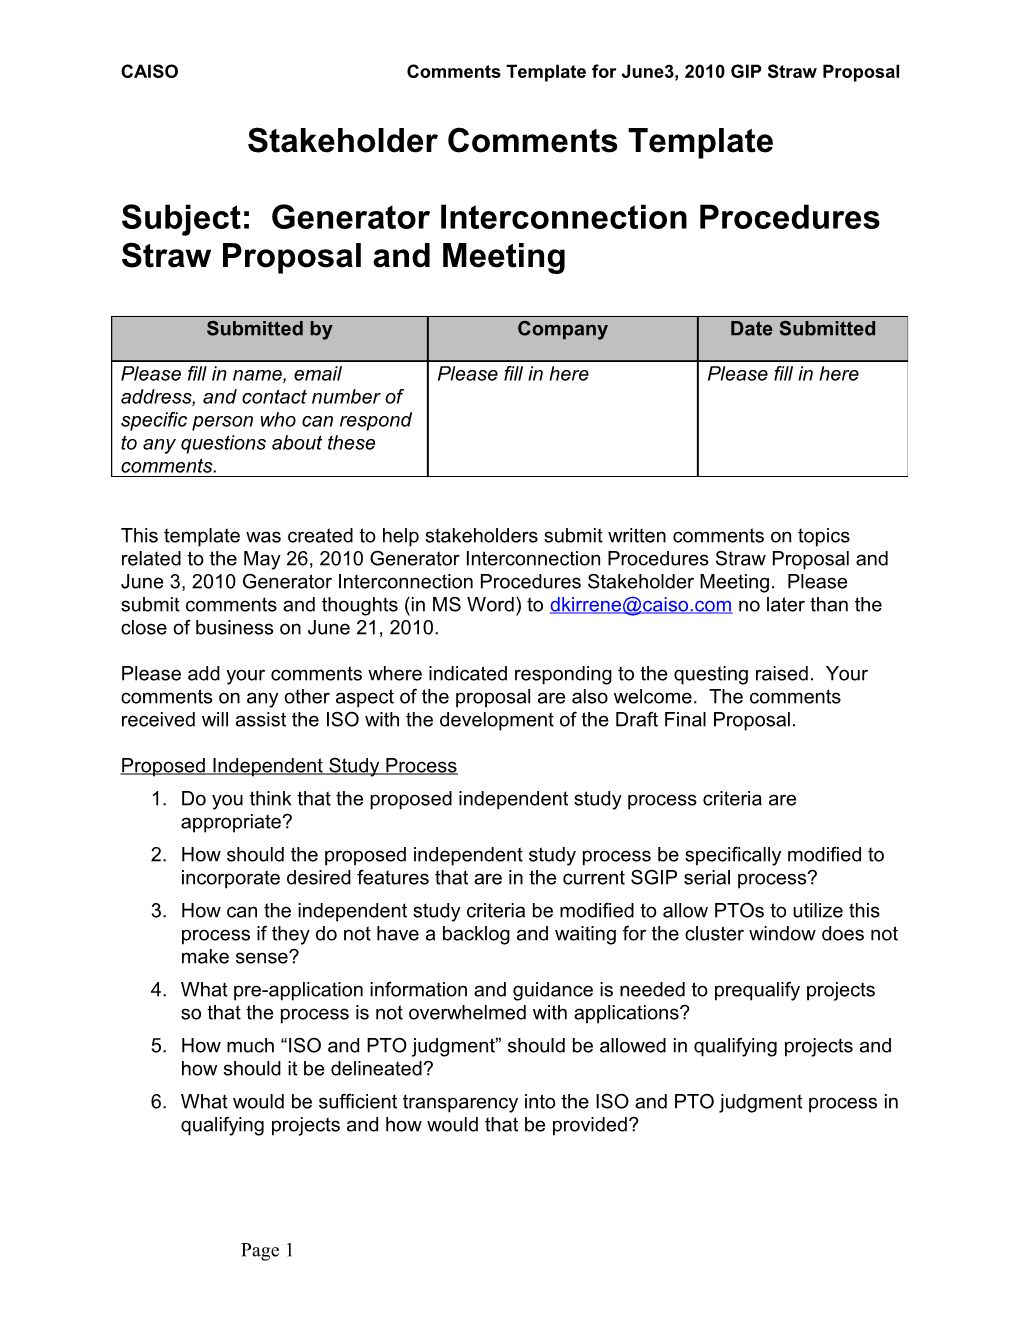 Stakeholder Comments Template for GIP Straw Proposal